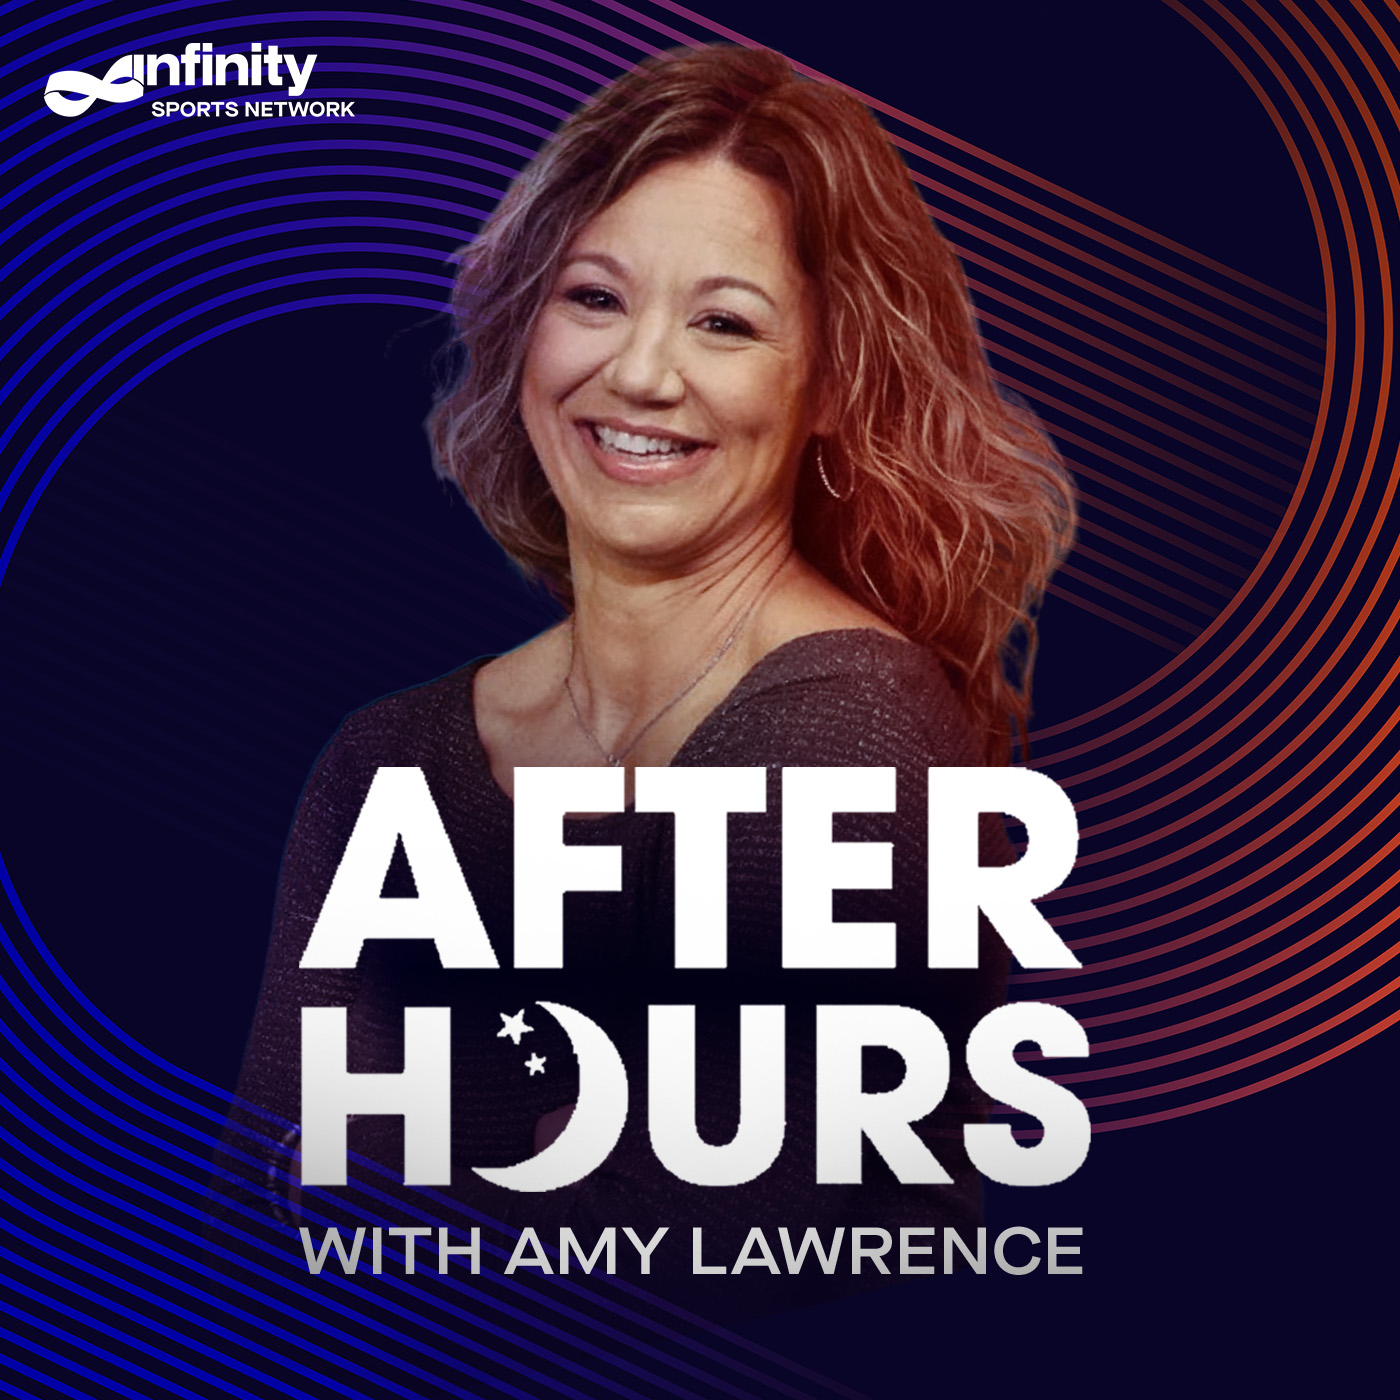 07/1/21 After Hours with Amy Lawrence PODCAST: Hour 2